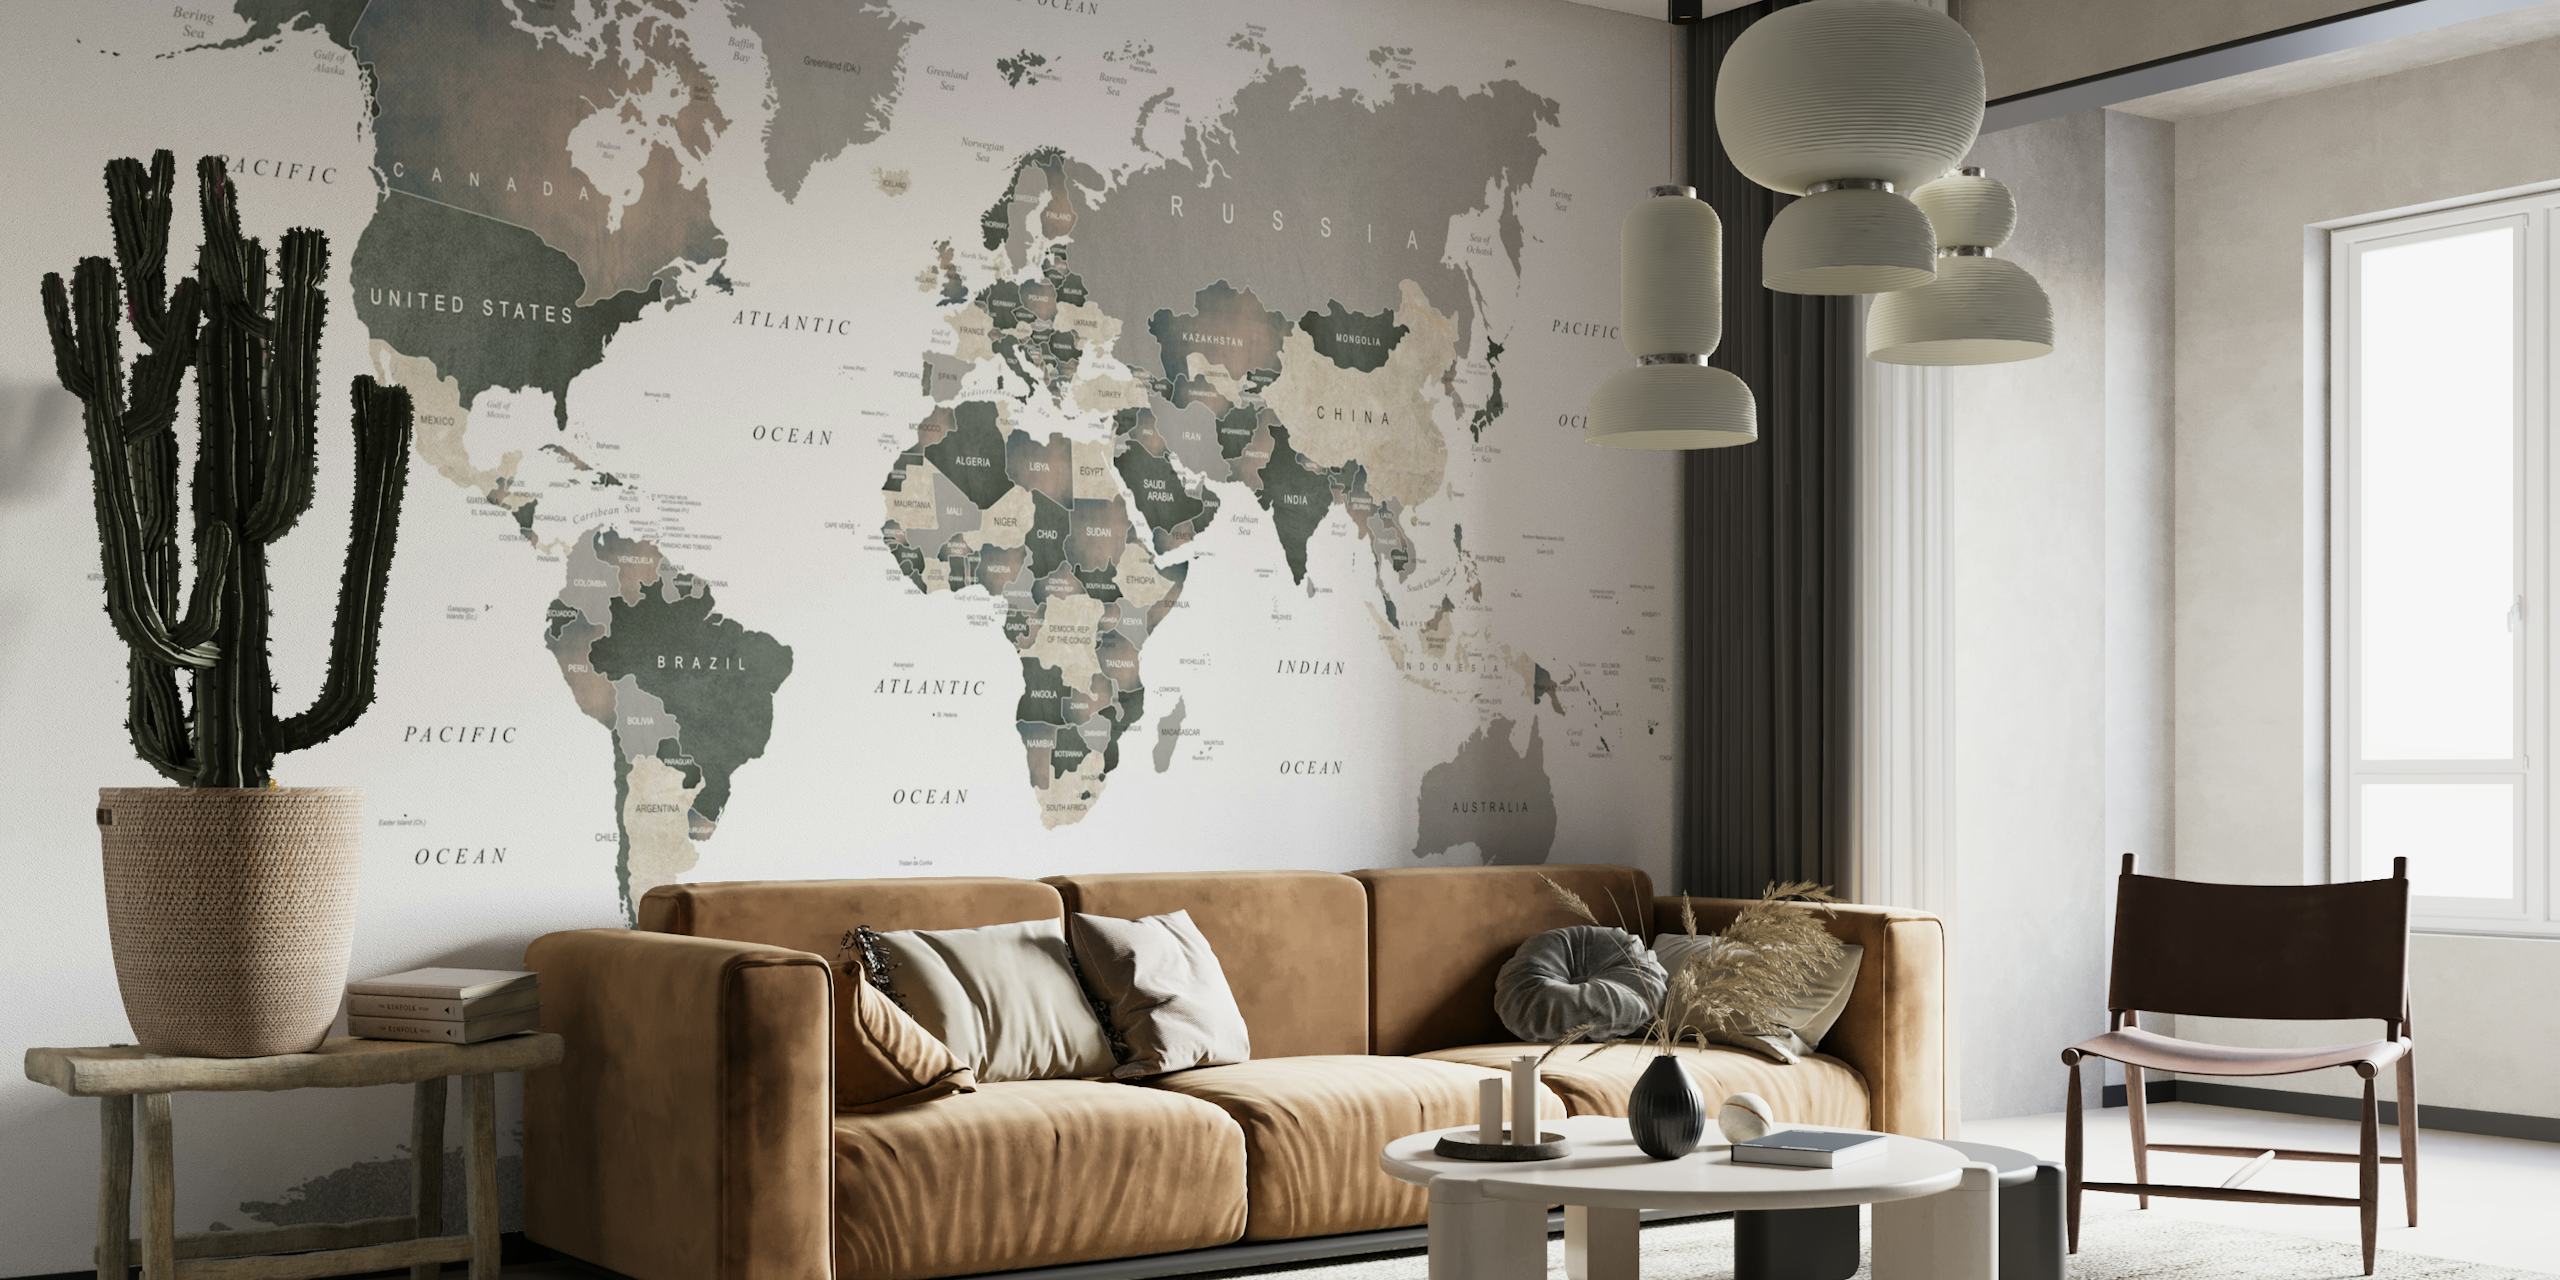 Map of the World Muted Tones tapetit